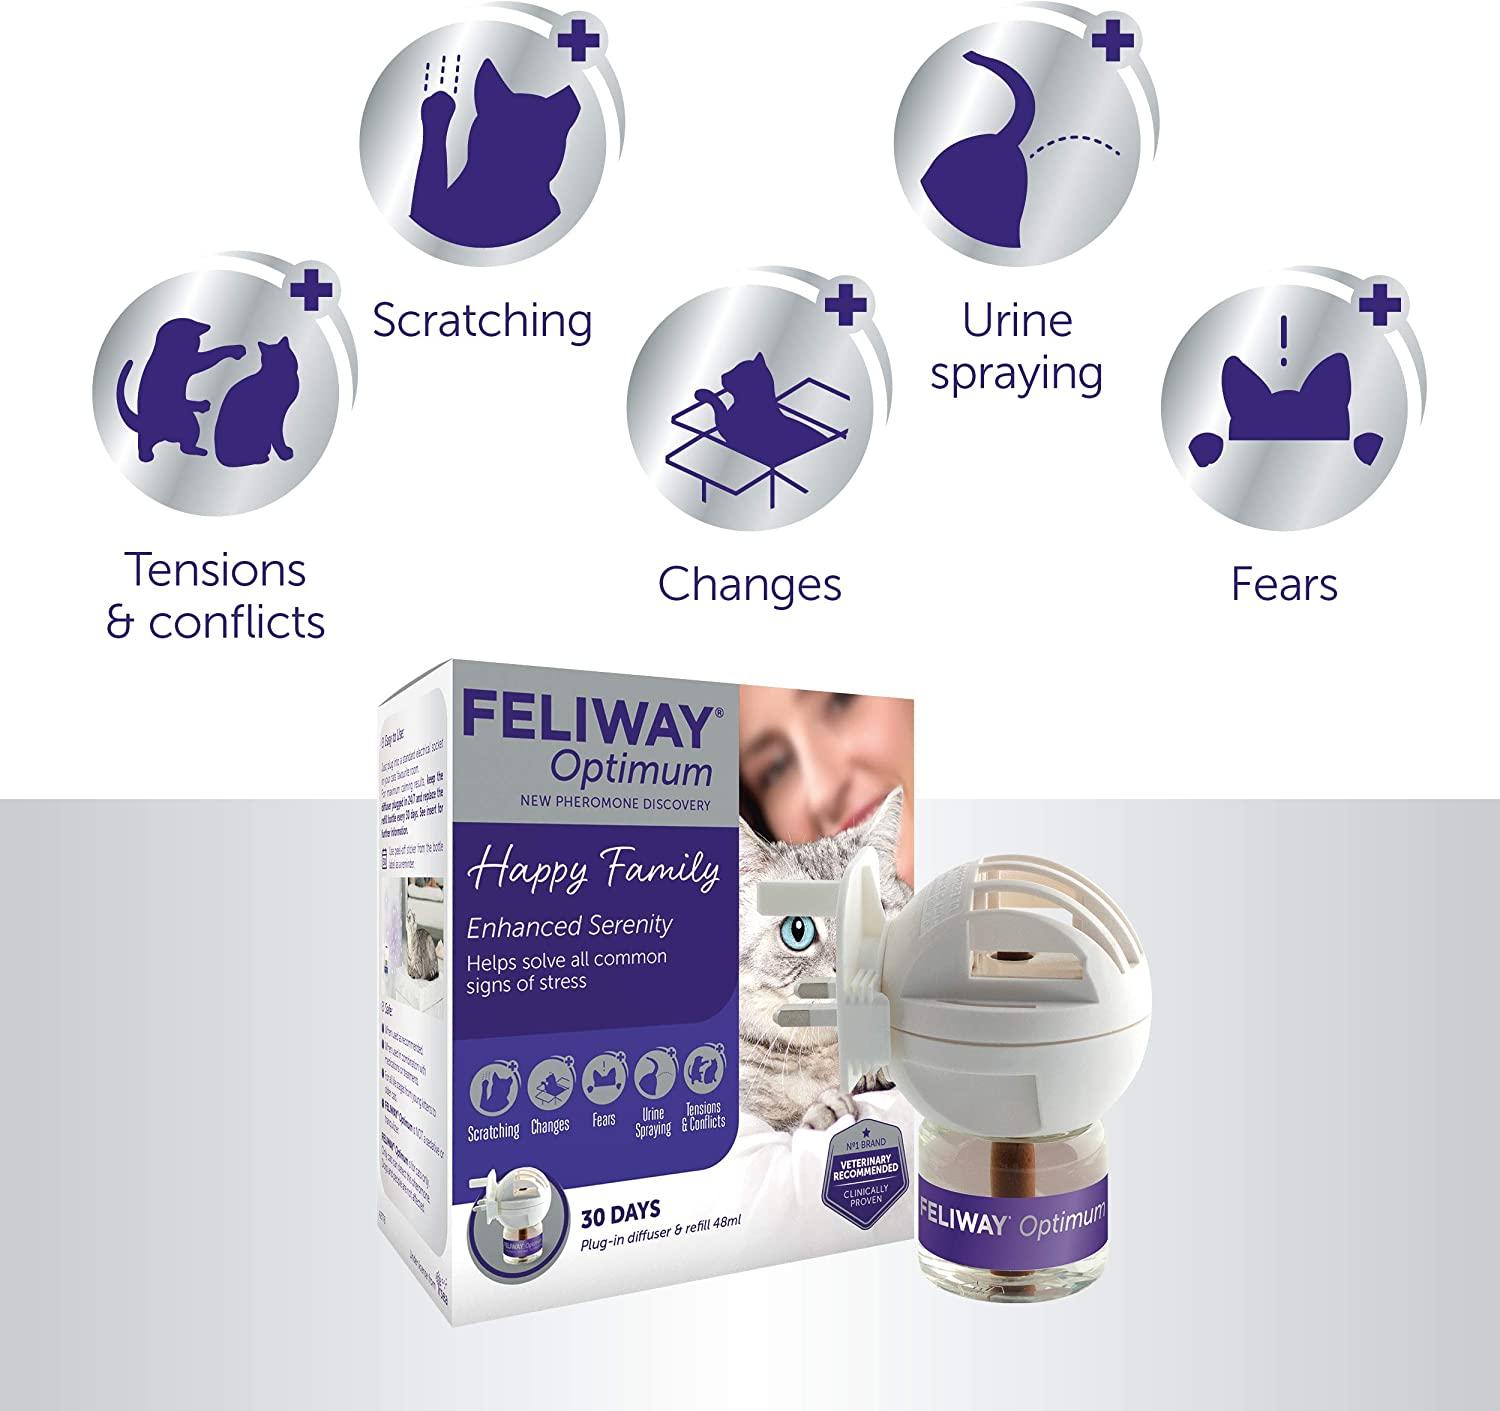 Feliway Optimum Refill, The Best Solution to Ease cat Anxiety, cat Conflict  and Stress in The Home